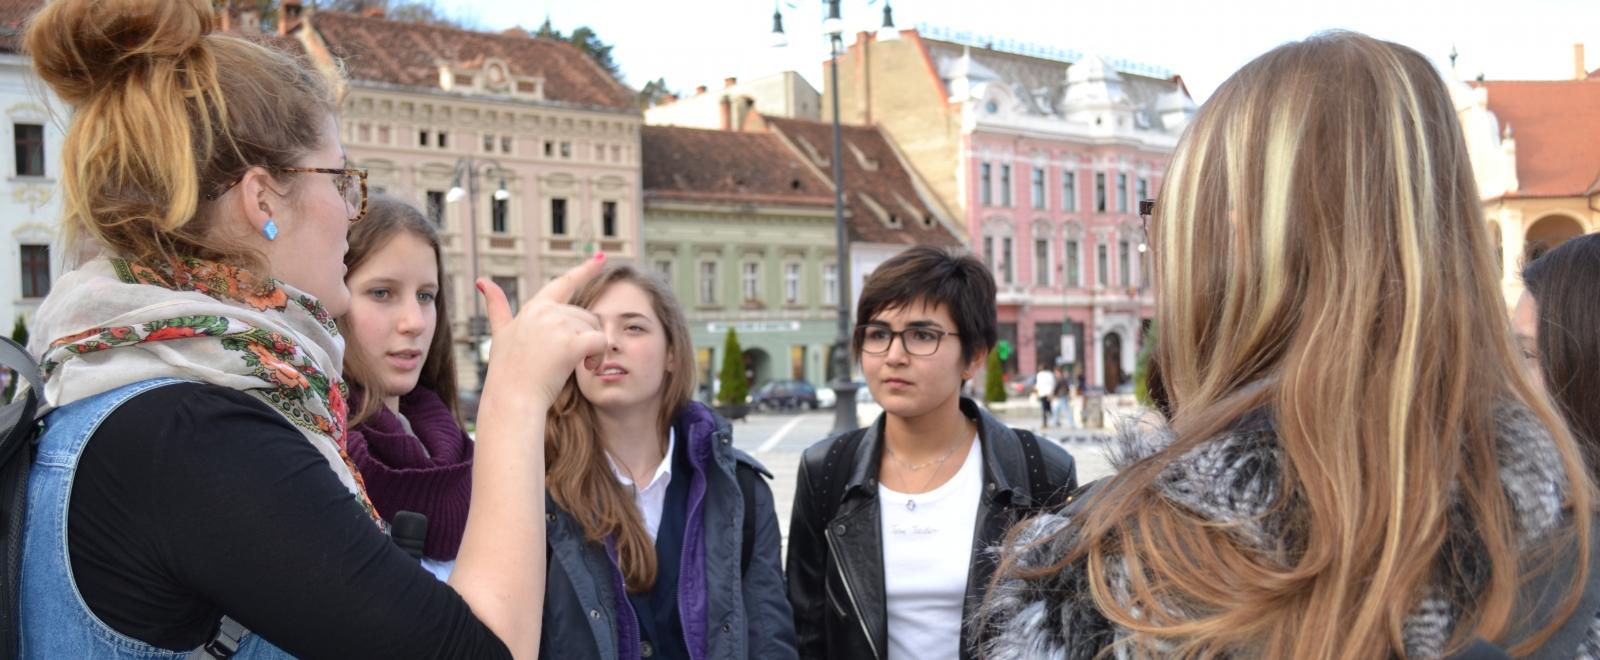 Volunteers in Romania listen to a Projects Abroad staff member during an induction tour.